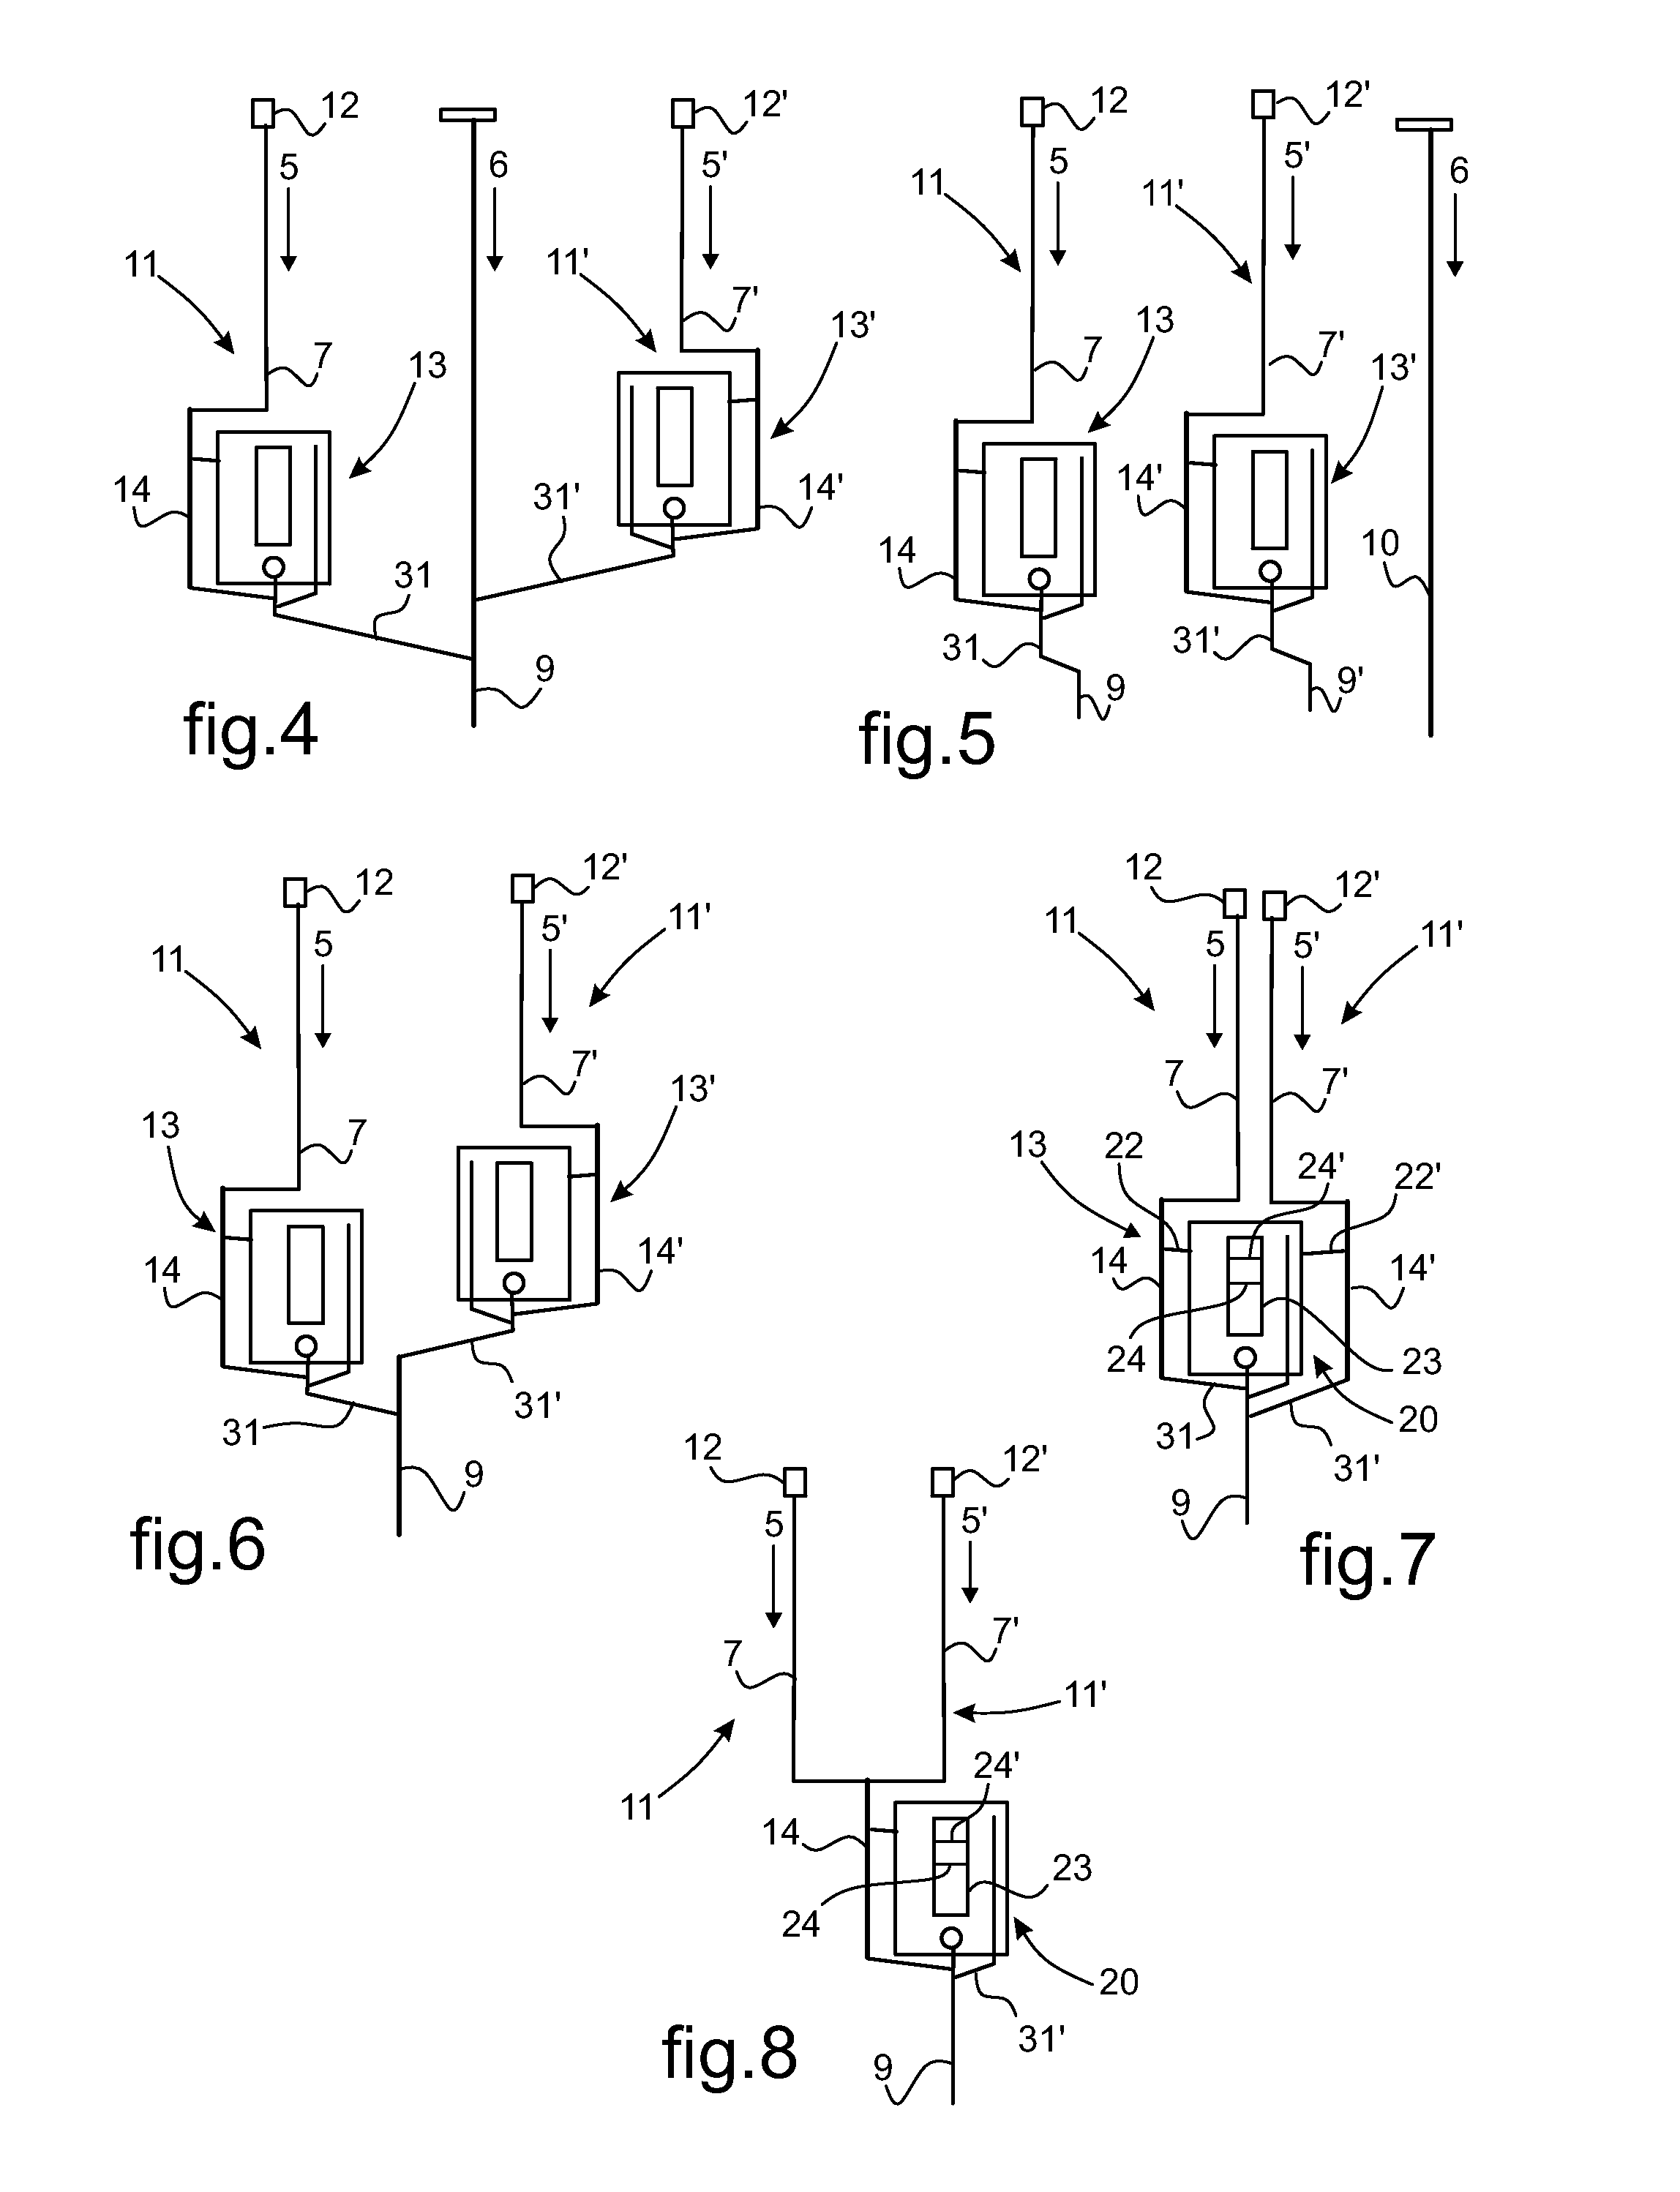 Drainage circuit for draining liquid coming from a power plant of a rotorcraft, the circuit incorporating an appliance for monitoring an excessive flow of the liquid